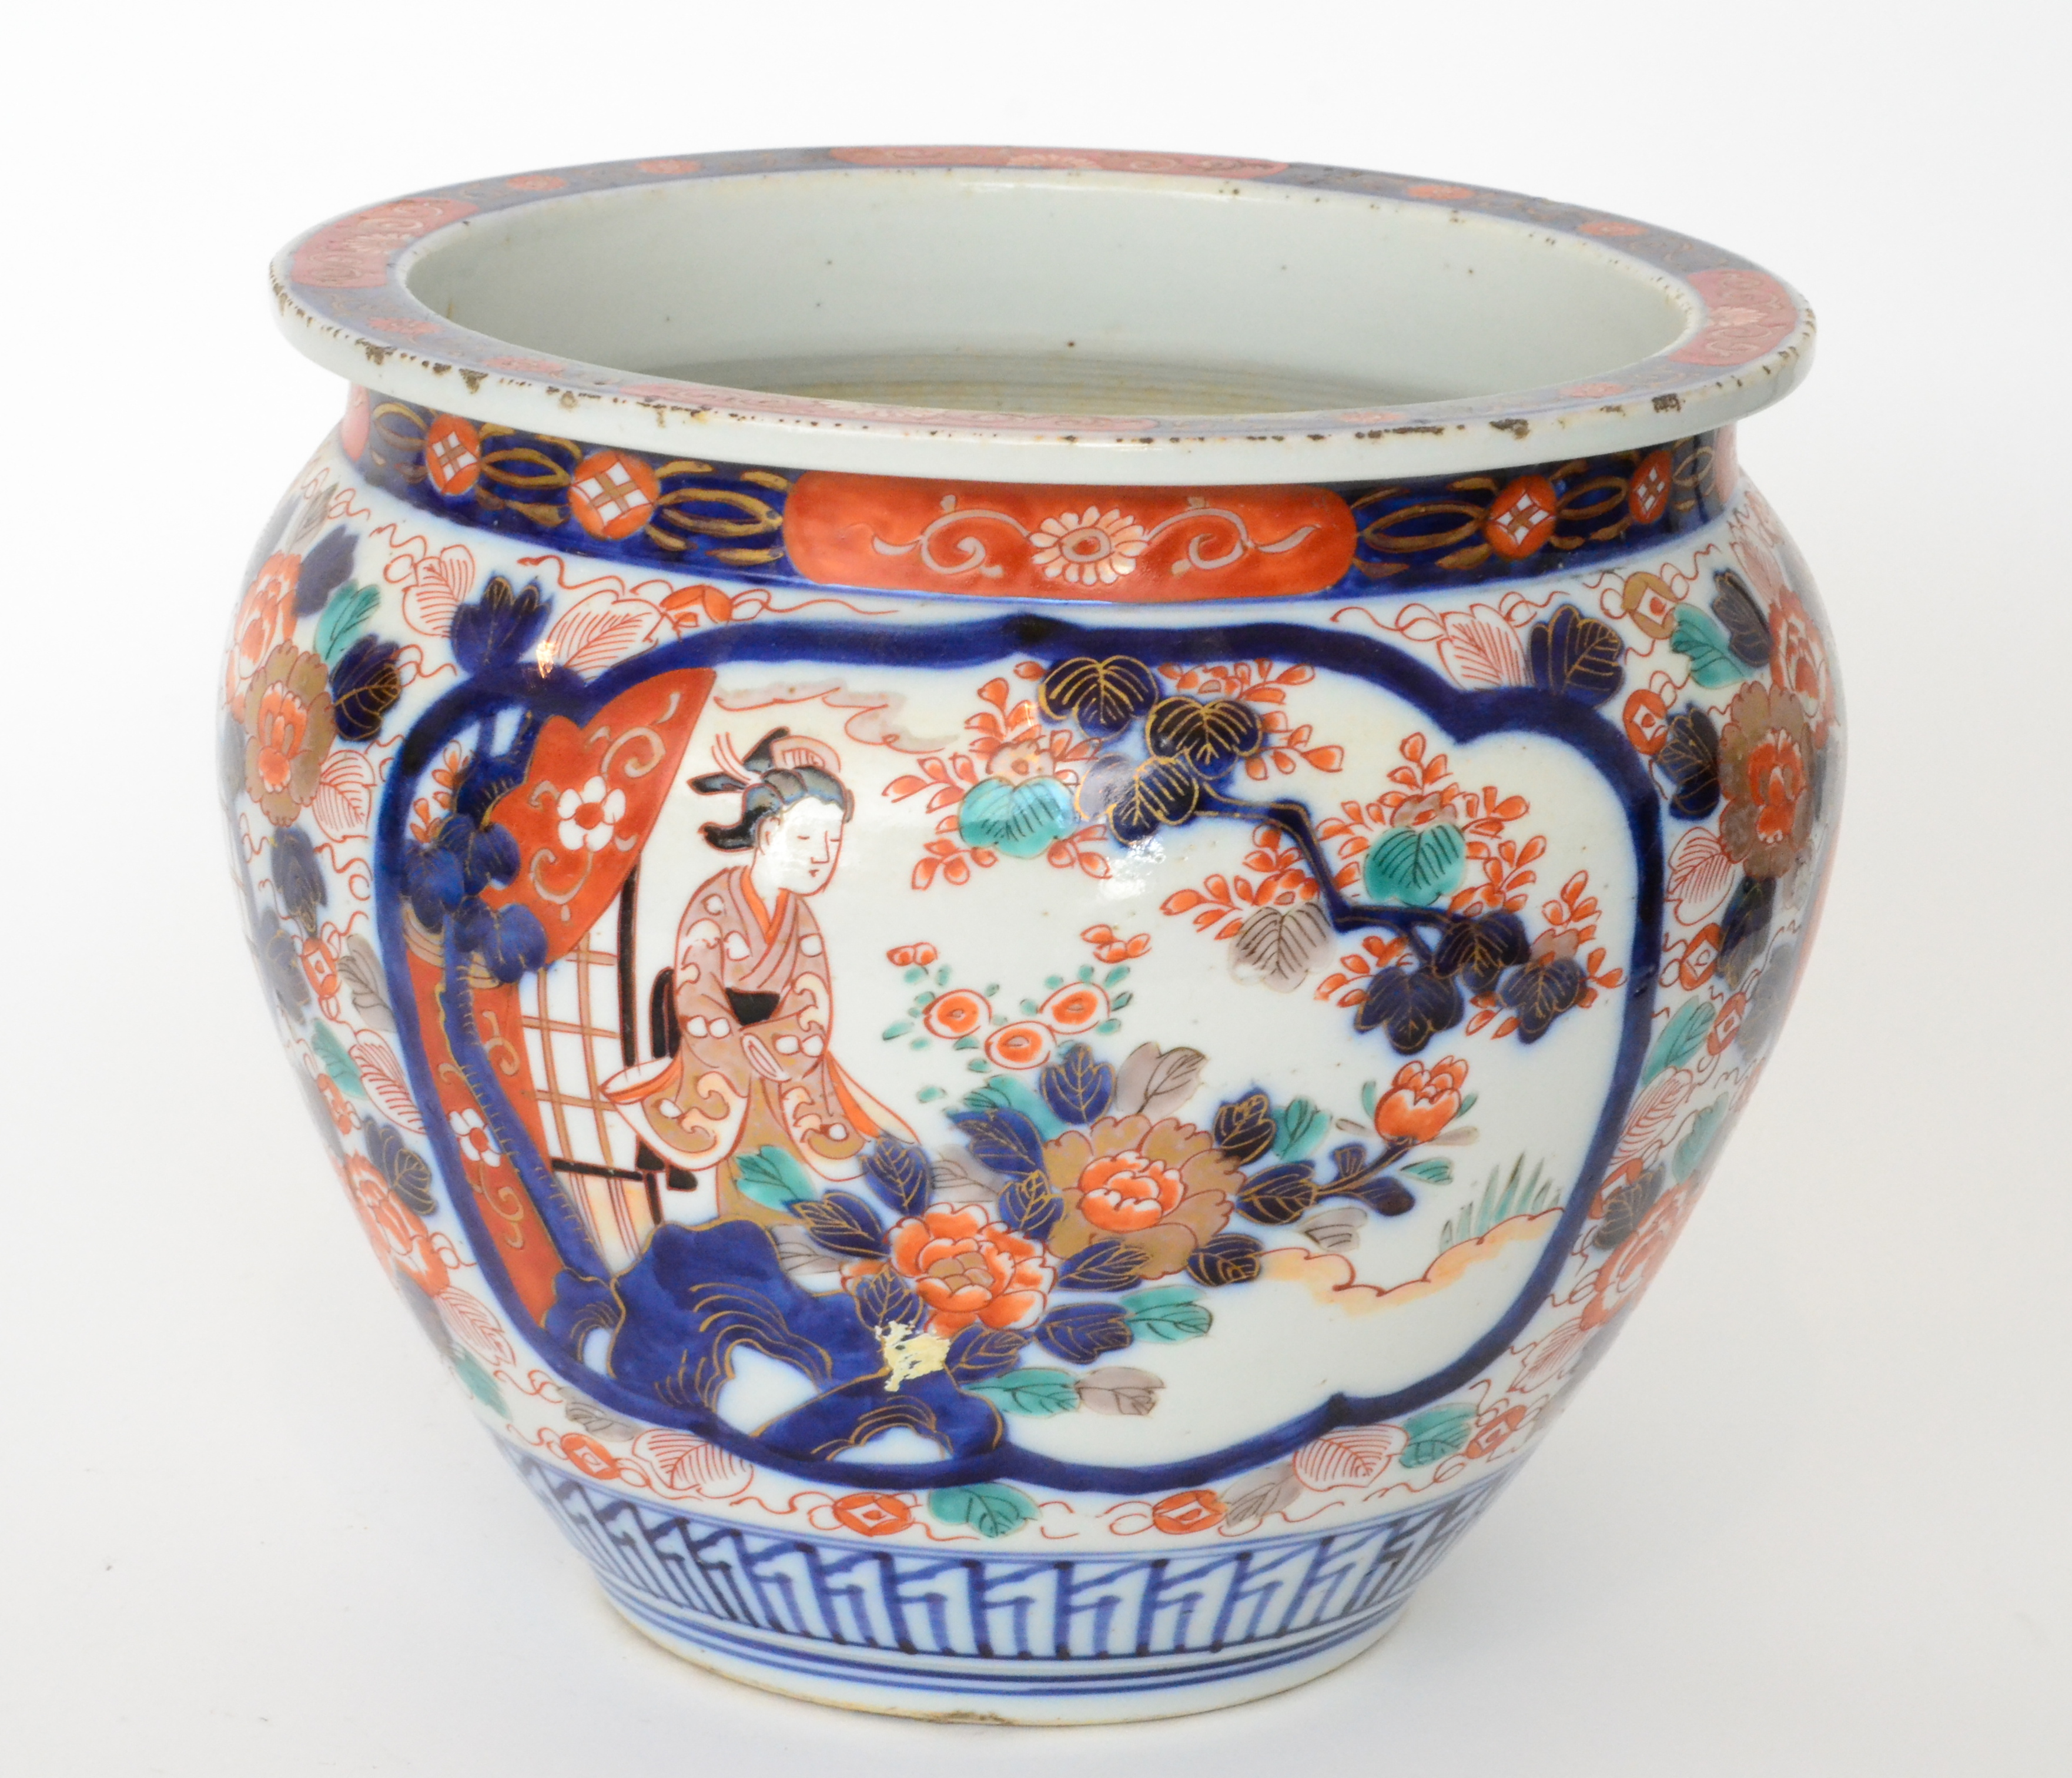 A 20th Century Japanese jardiniere decorated in the Imari palette with panel scenes of women sat